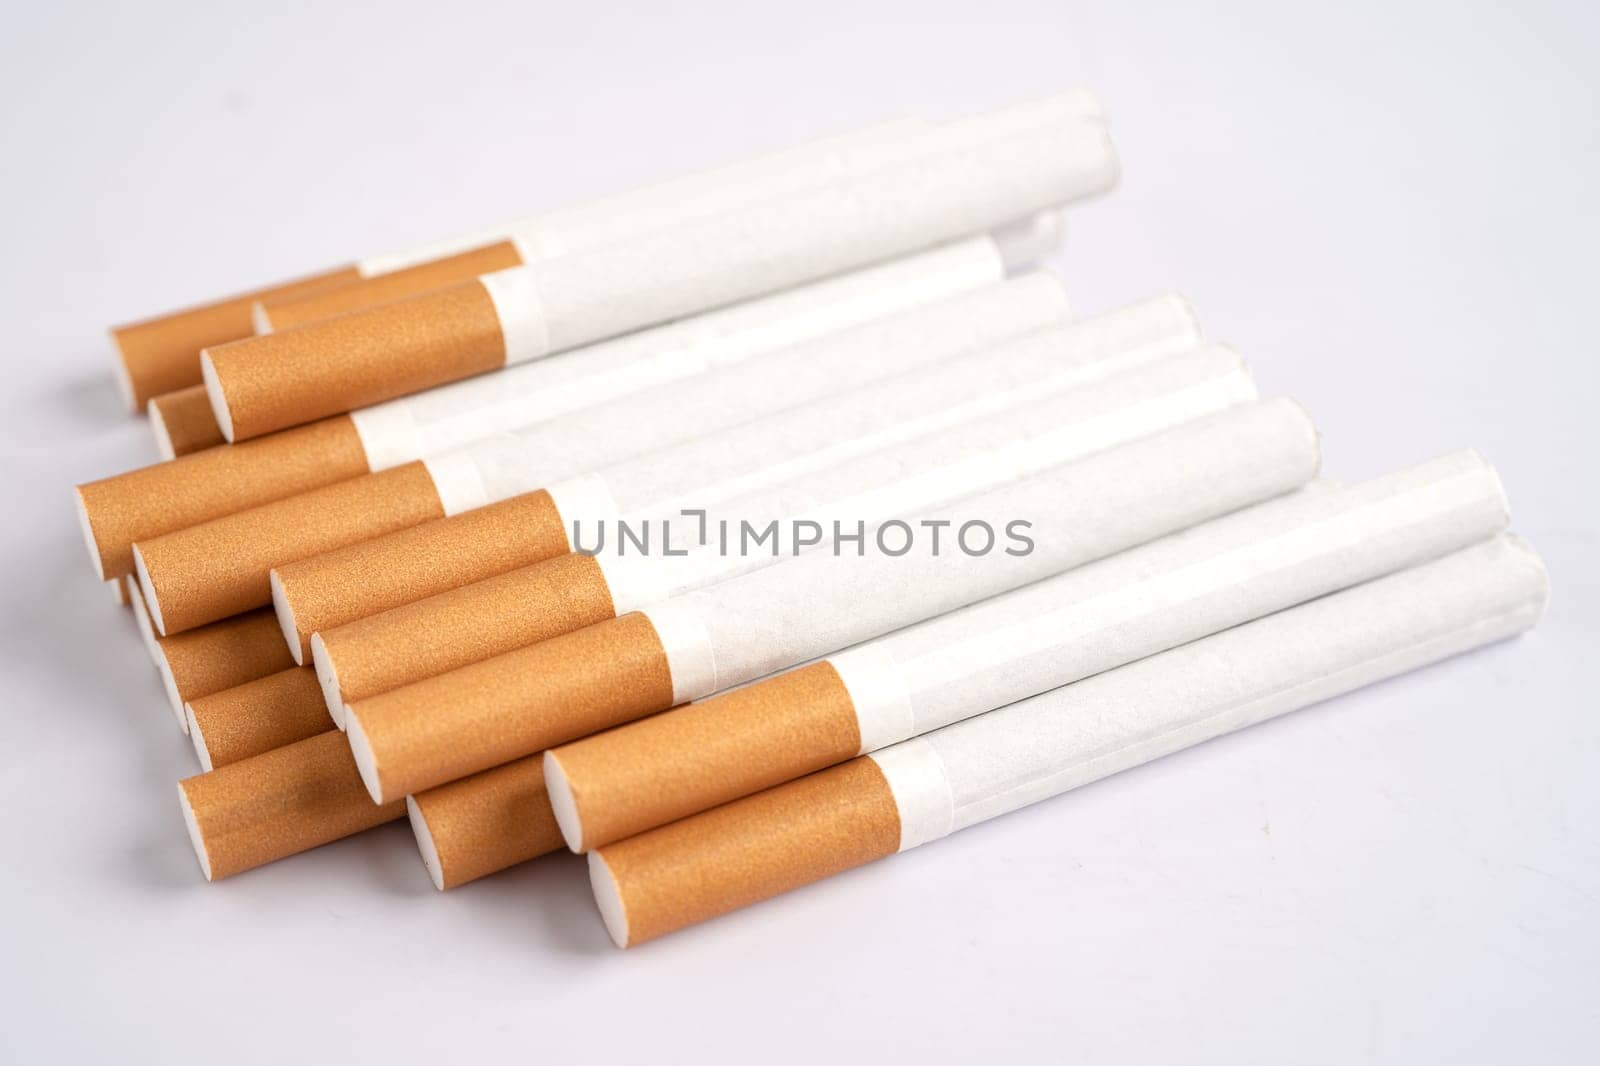 Cigarette, tobacco in roll paper with filter tube, No smoking concept.